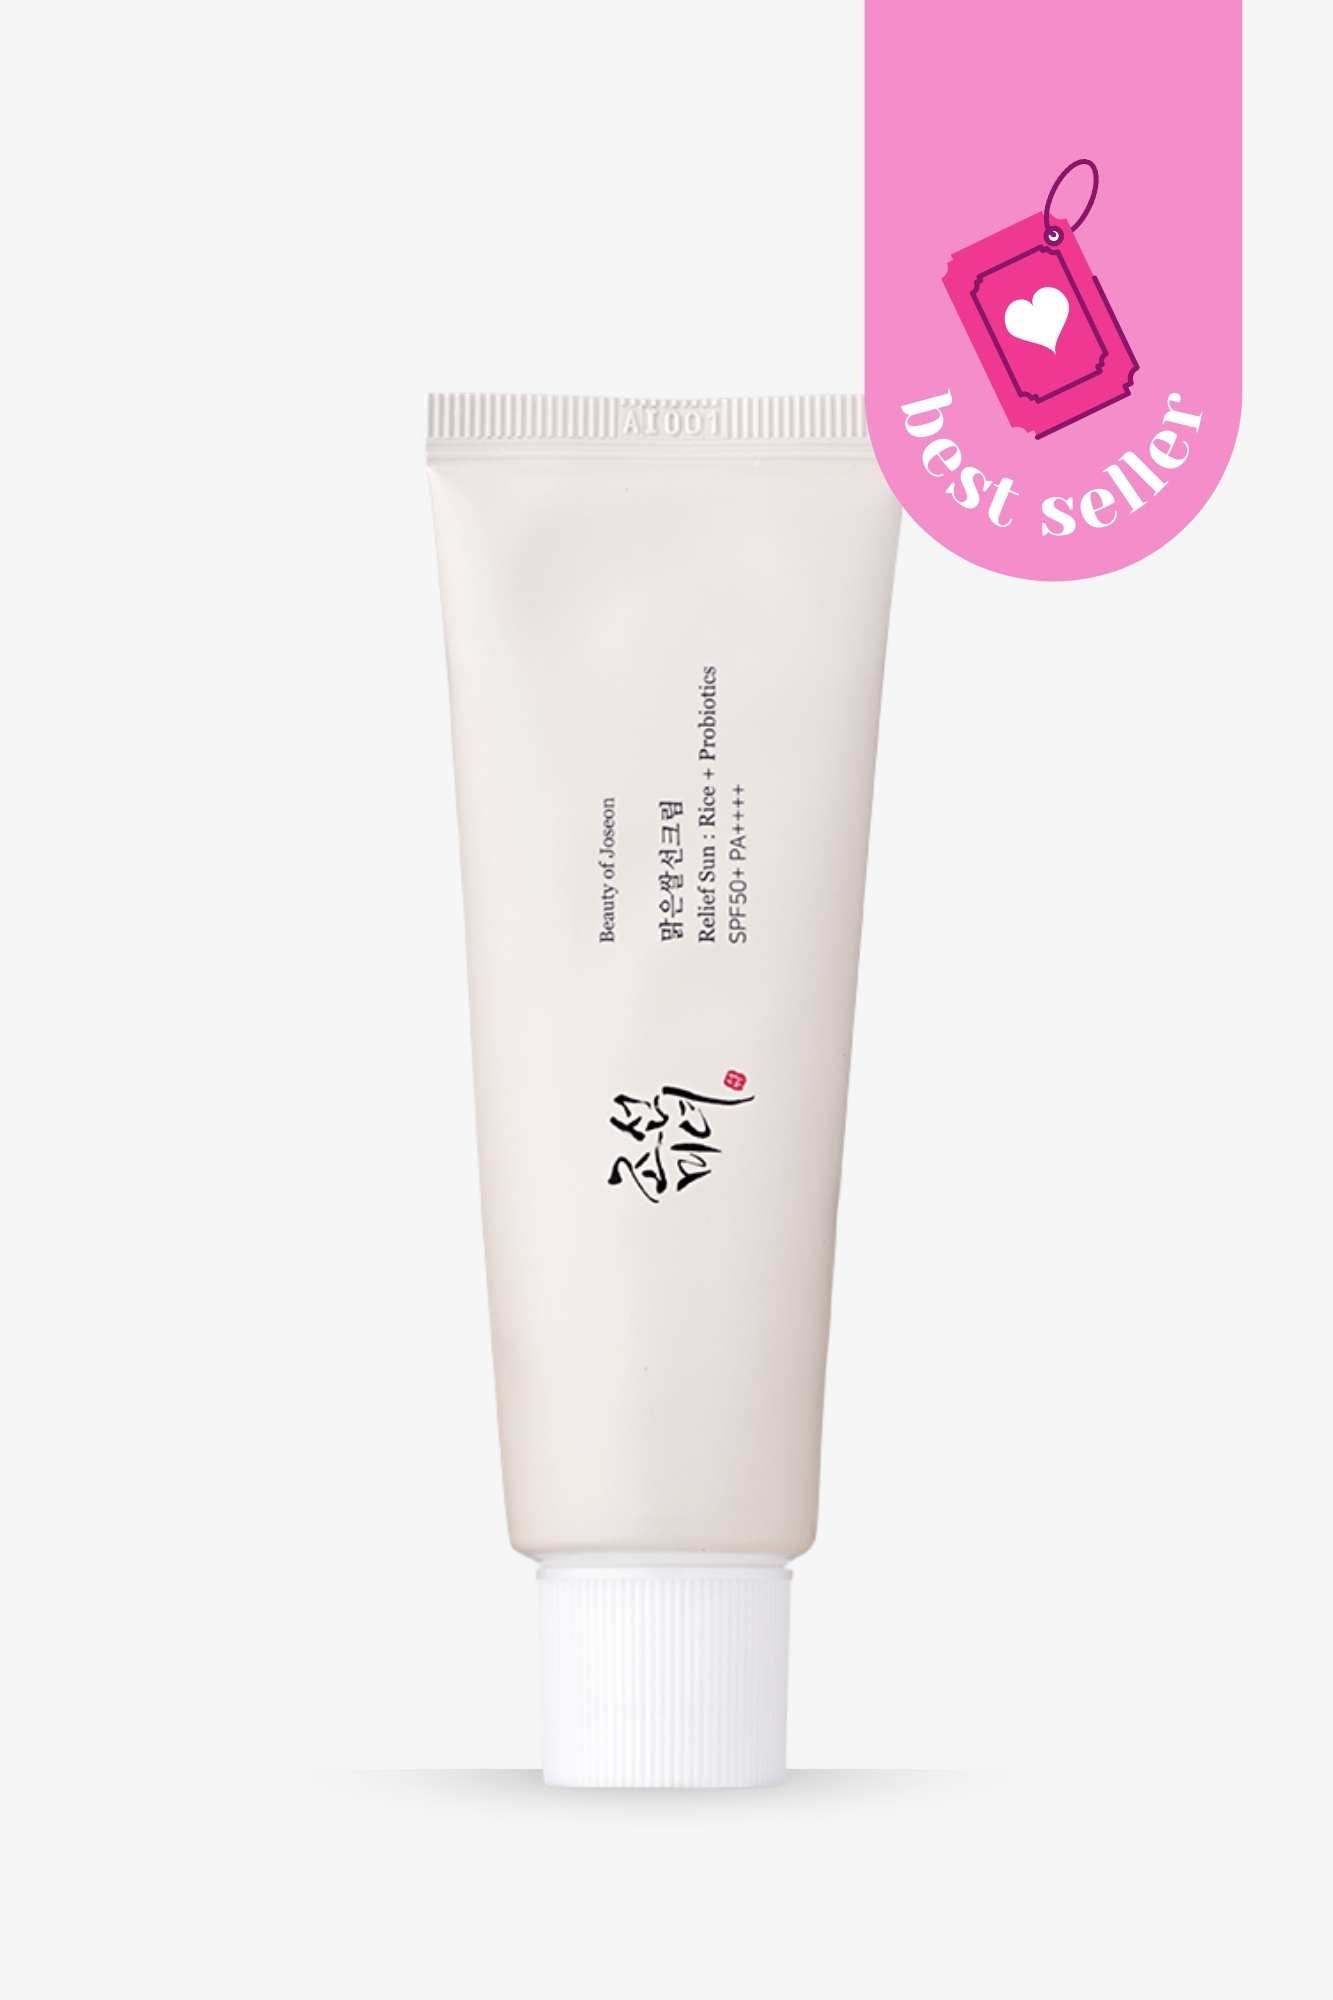 Beauty of Joseon Sunscreen Tube with a sticker that says "best seller"